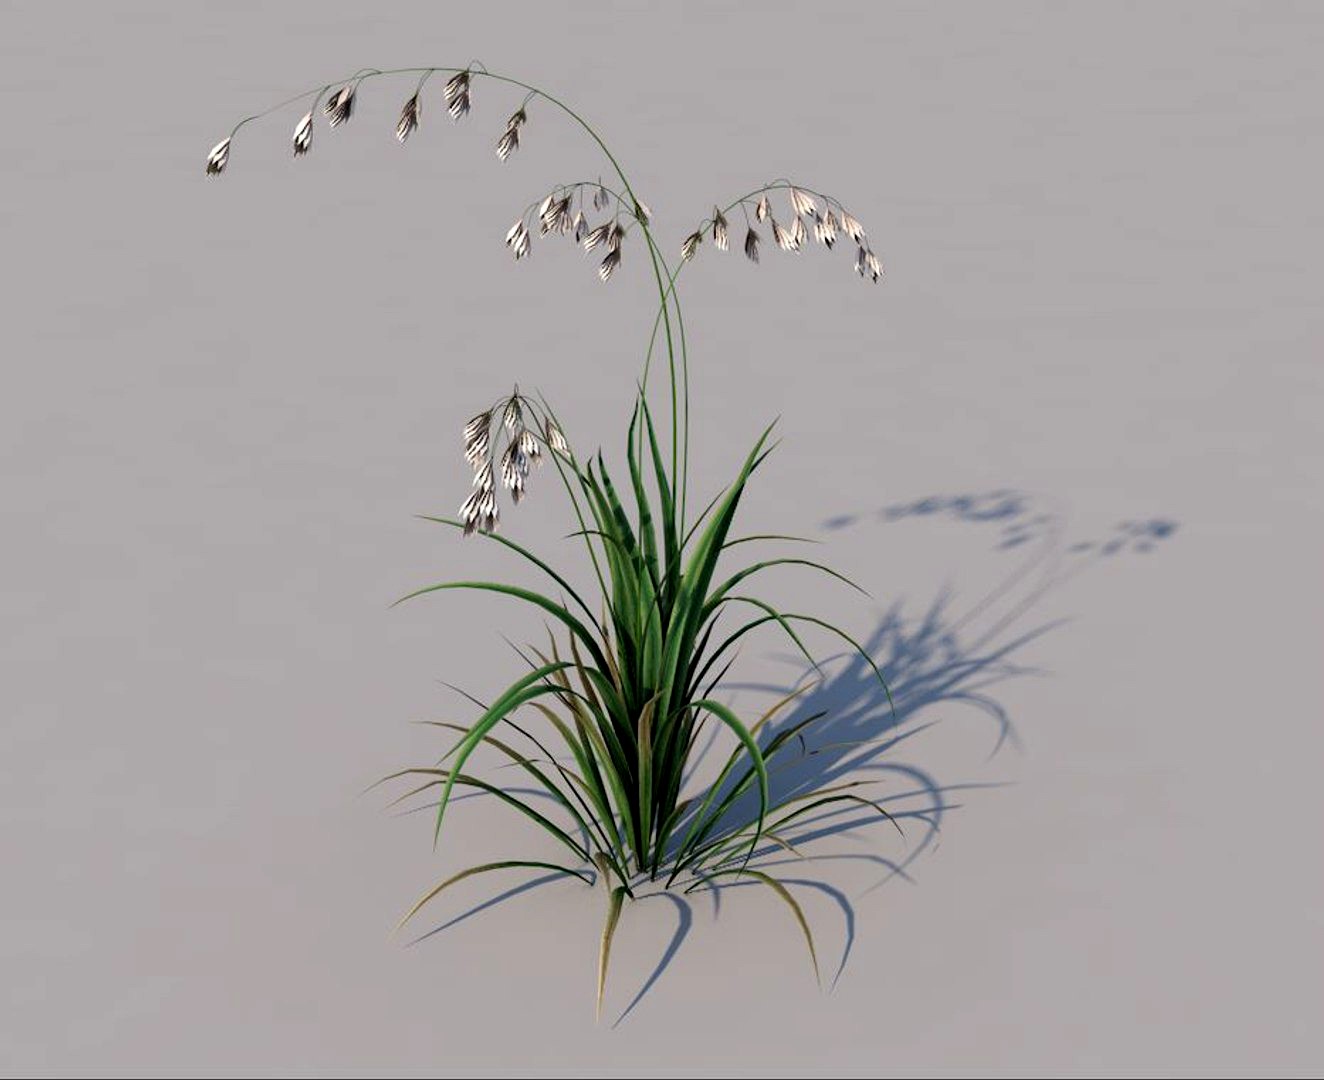 Leaning Meadow Grass